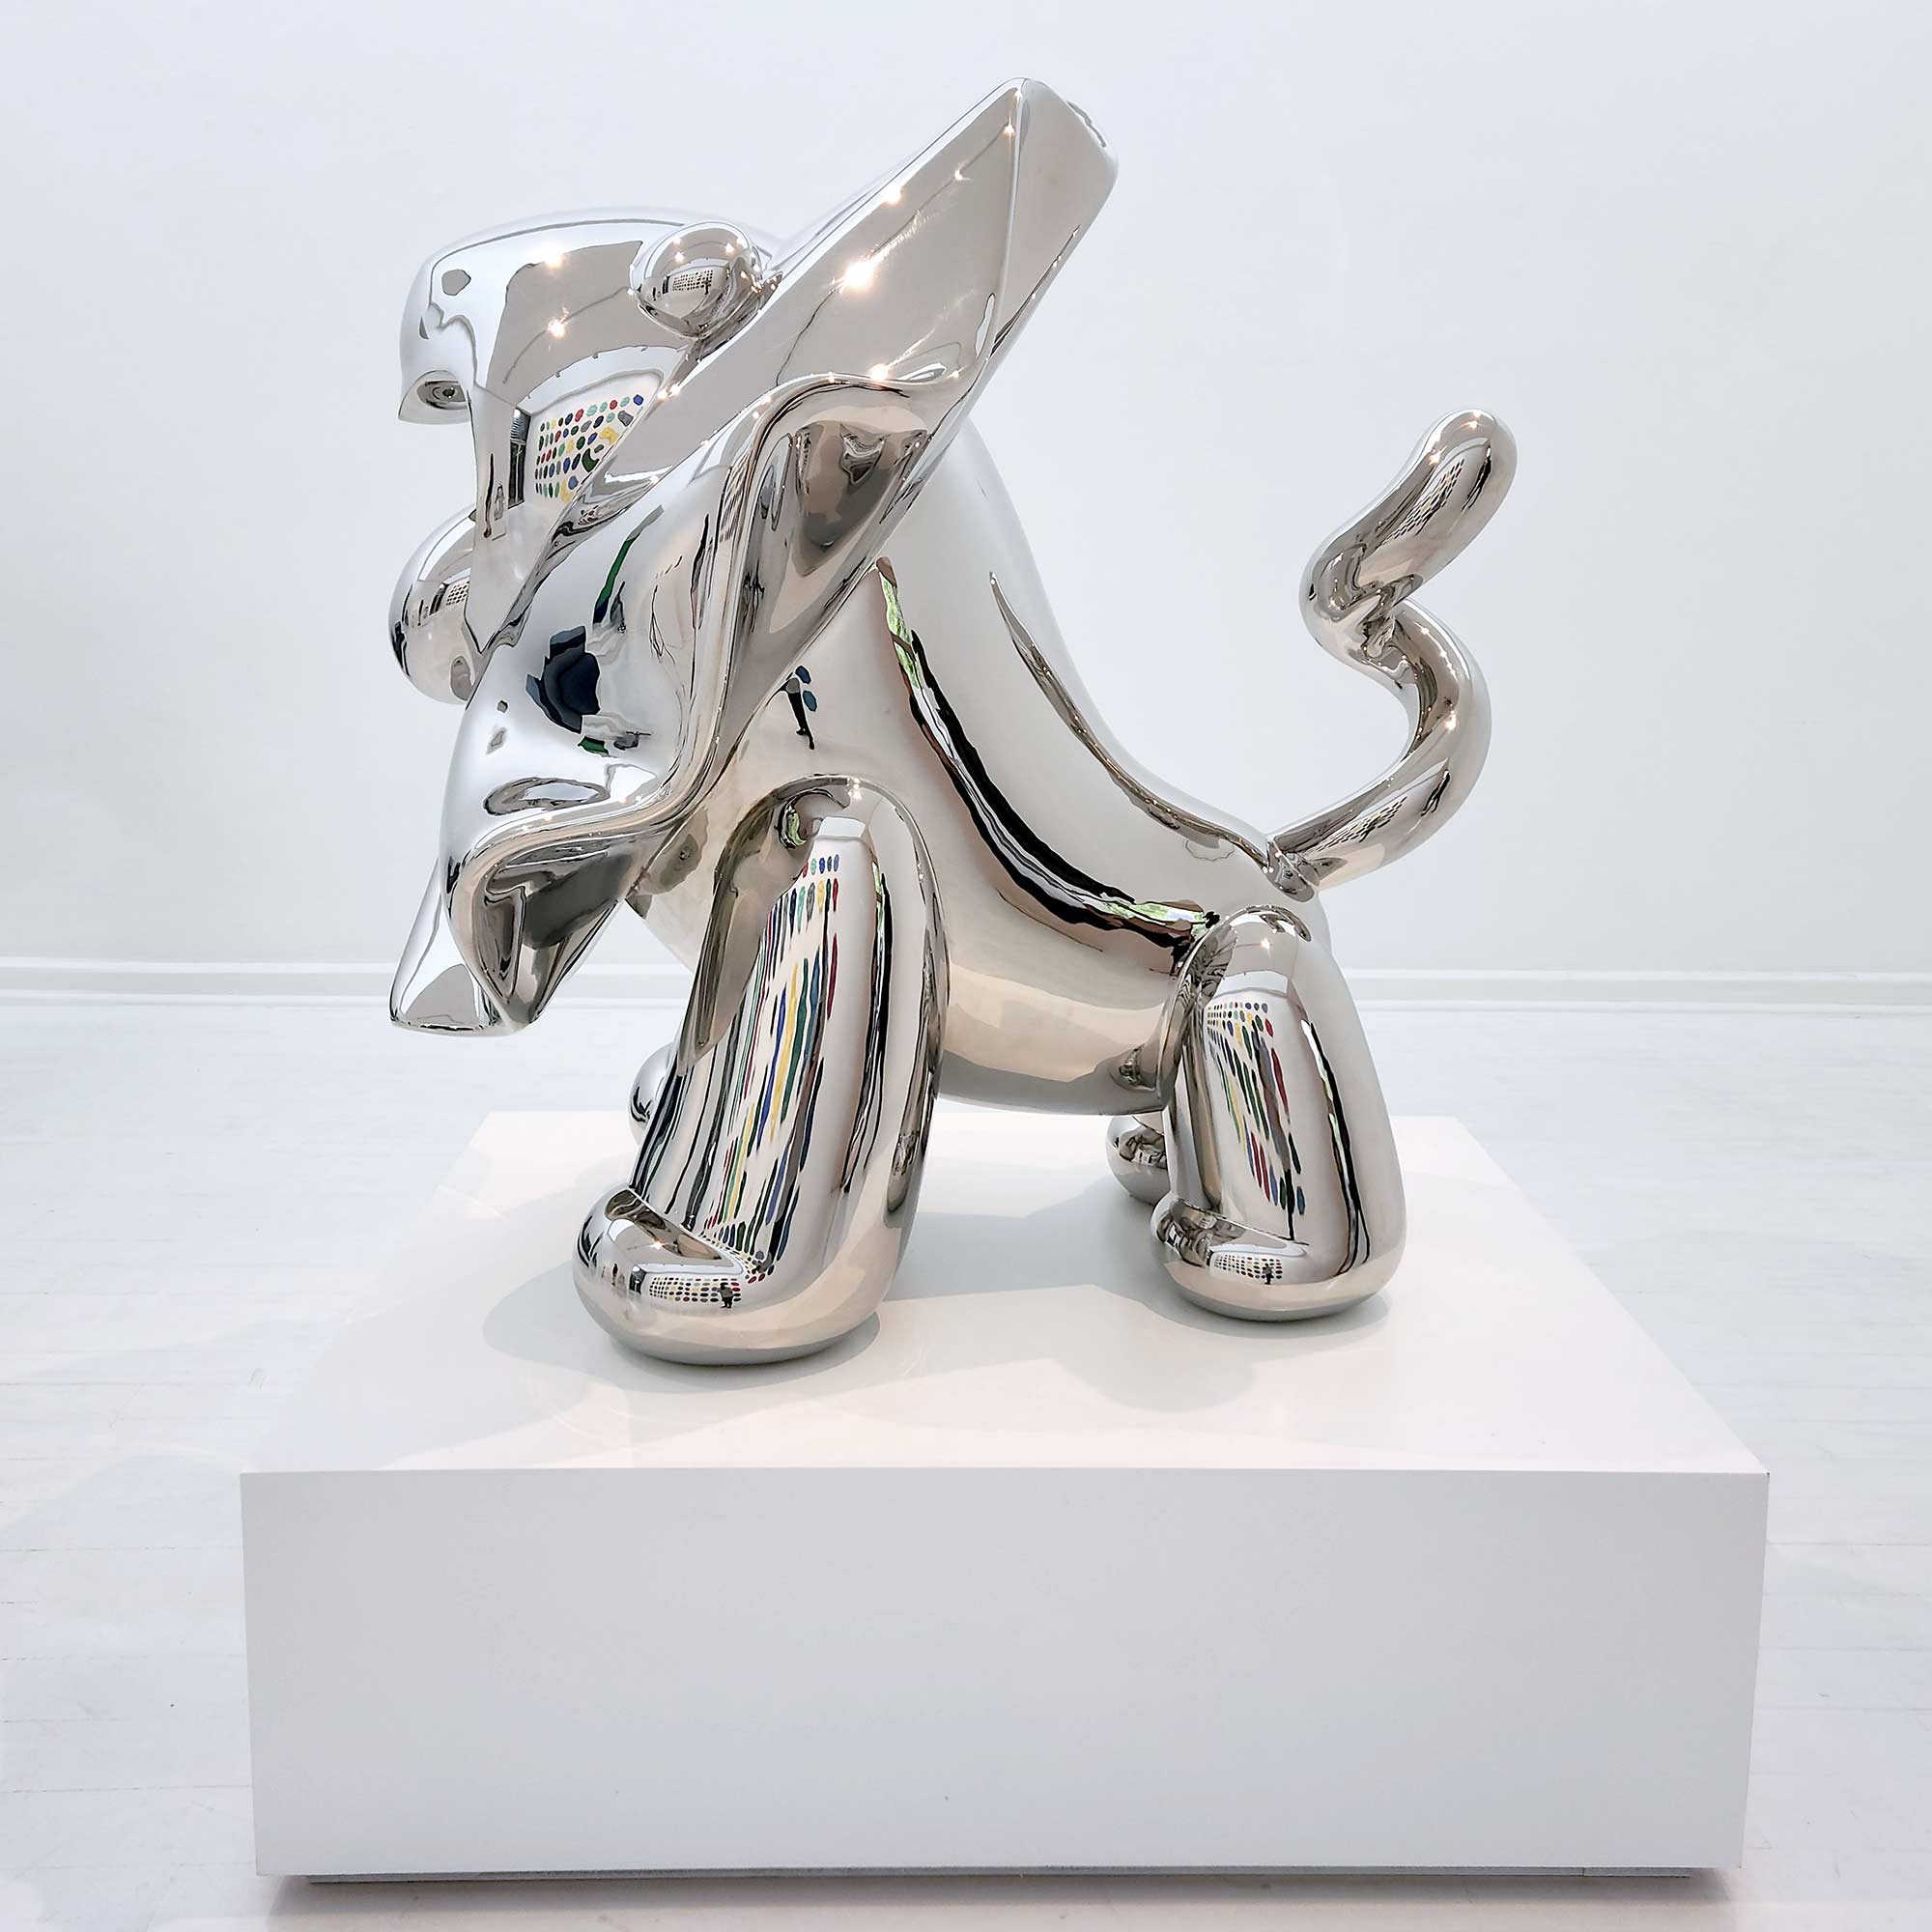 Lions breath polished stainless steel sculpture large size by Ferdi B Dick , side view 2